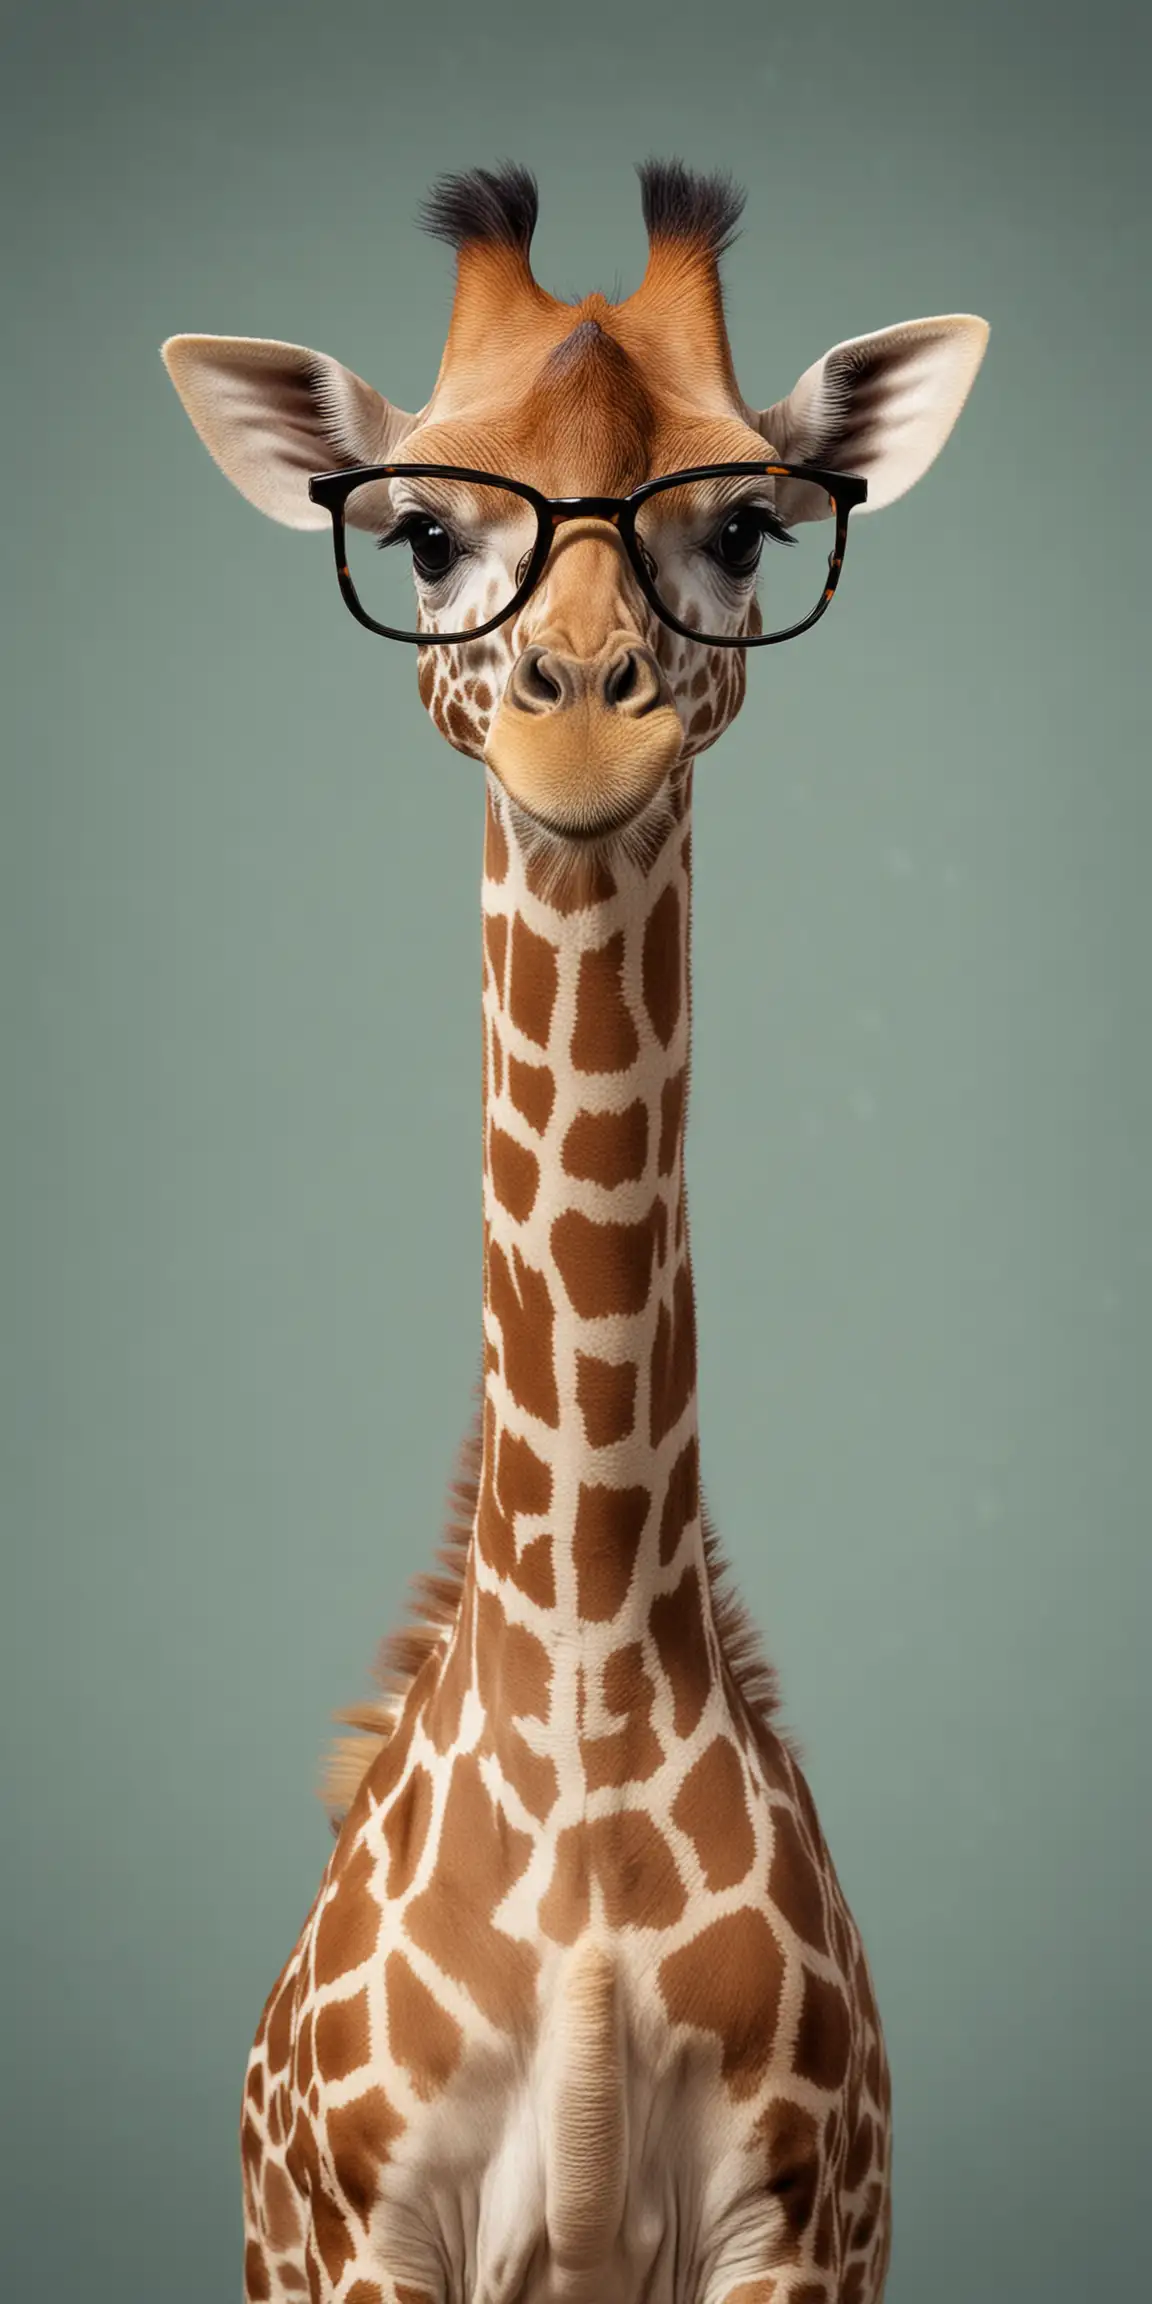 Baby Giraffe in Glasses Engaged in Quiz Time Fun